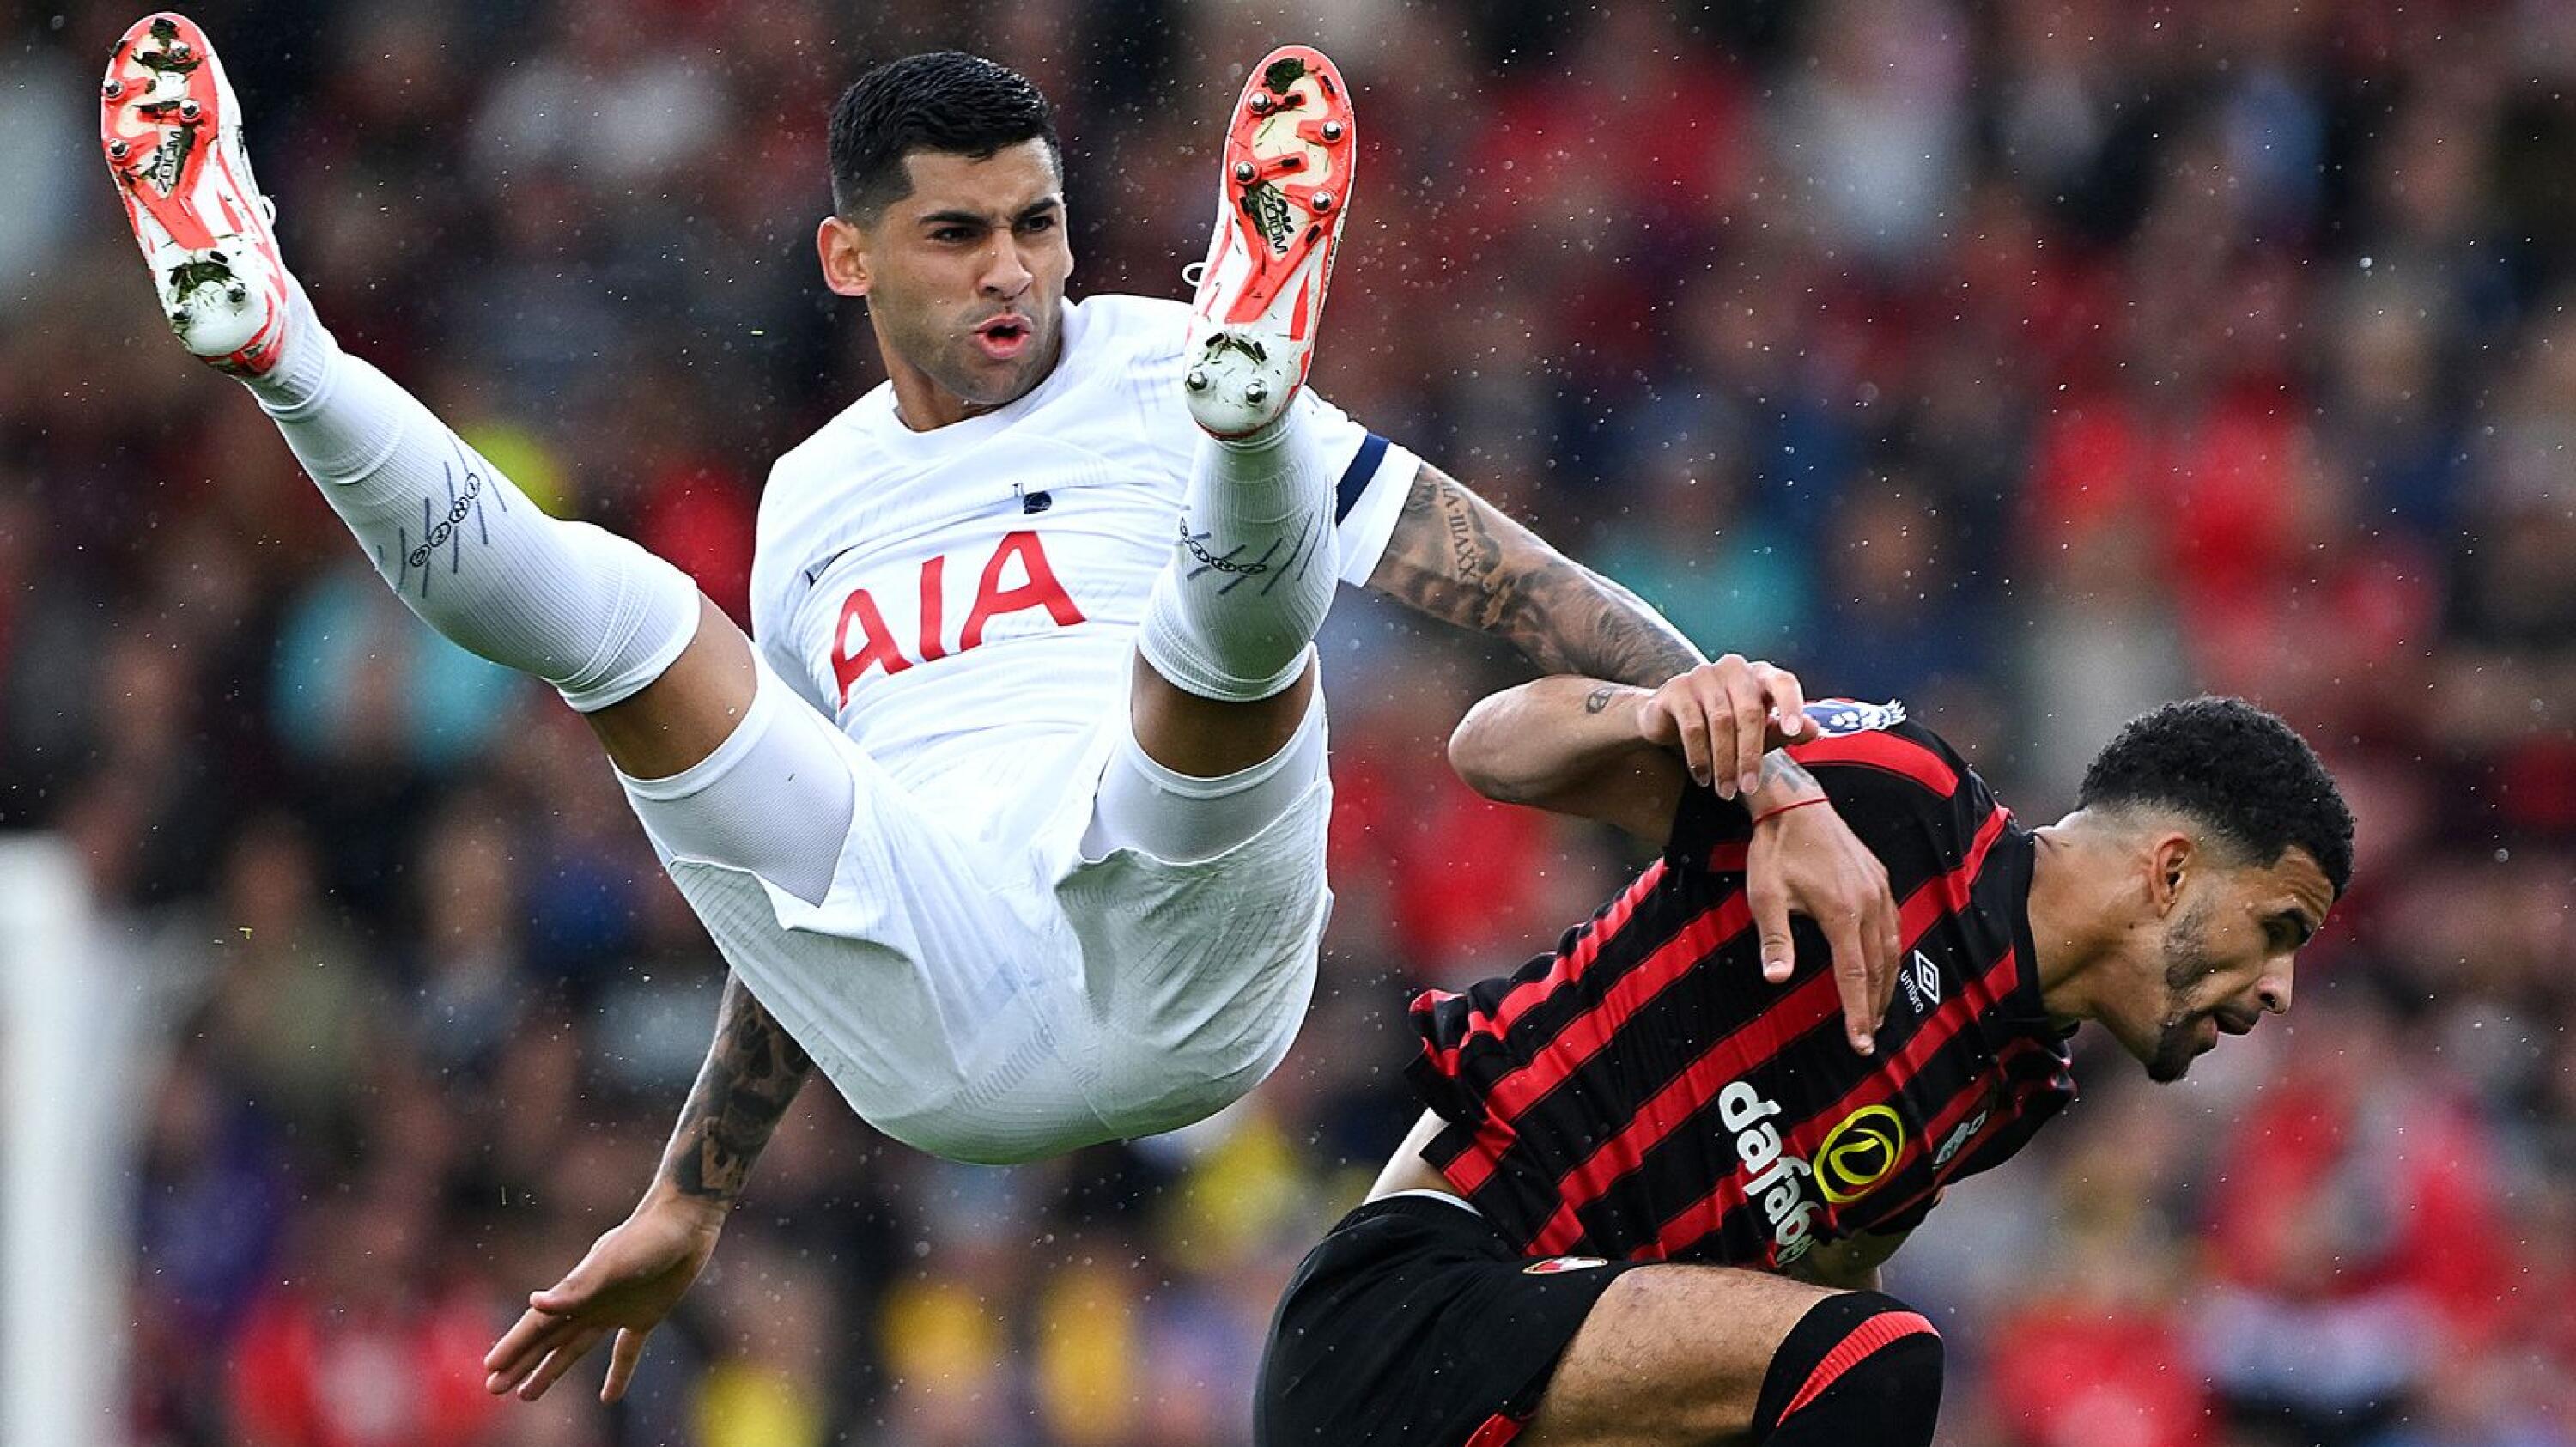 Tottenham Hotspur's Argentinian defender Cristian Romero (left) challenges Bournemouth's English striker Dominic Solanke during the English Premier League football match at the Vitality Stadium in Bournemouth, southern England